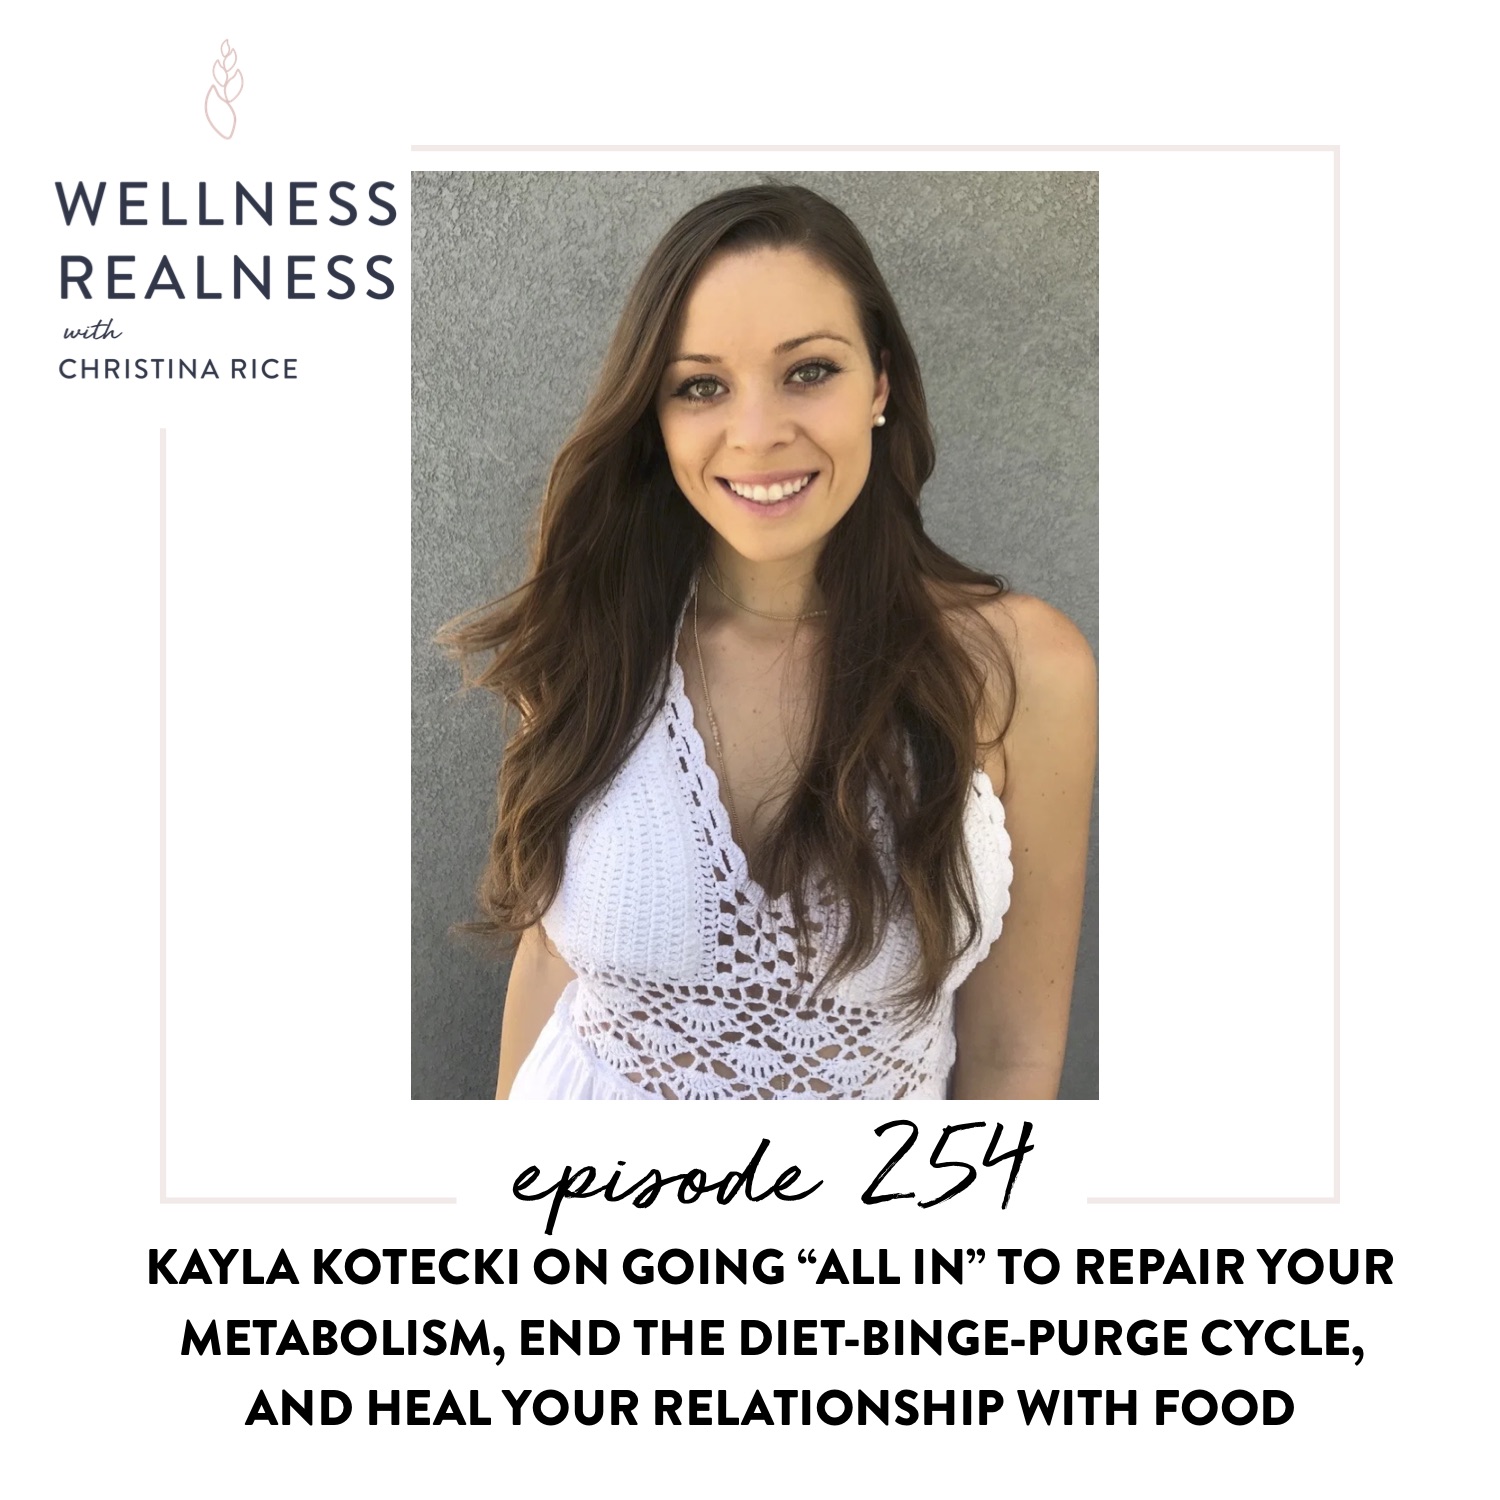 254: Kayla Kotecki on Going "All In" to Repair Your Metabolism, End the Diet-Binge-Purge Cycle, and Heal Your Relationship with Food